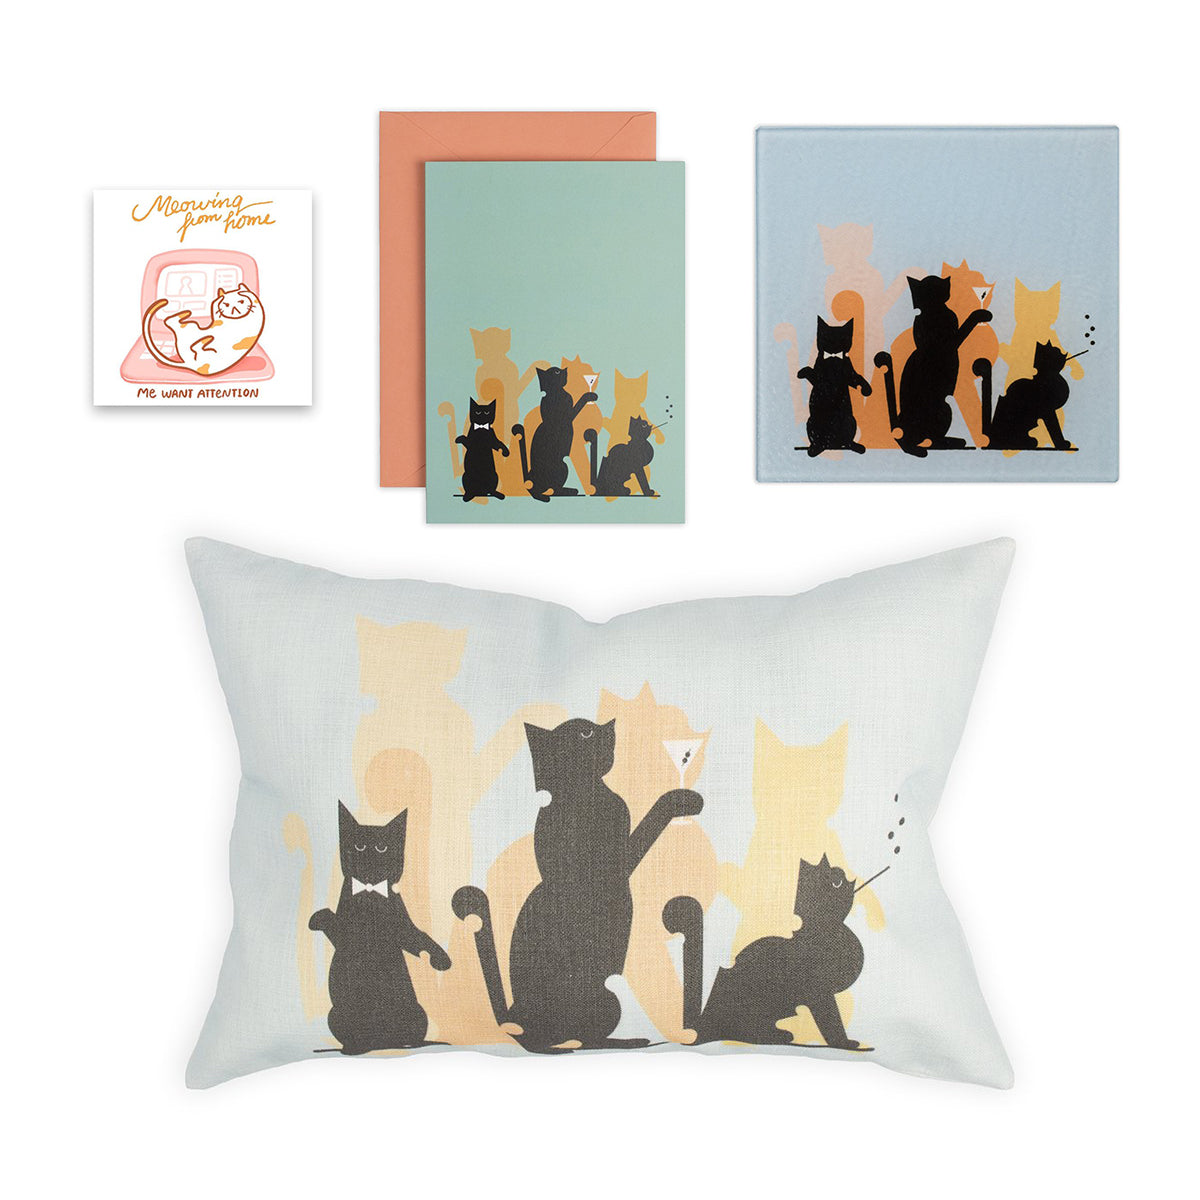 jazz cats bundle including a greeting card, trivet and pillow case cover featuring three silhouettes of cats in black and shades of orange